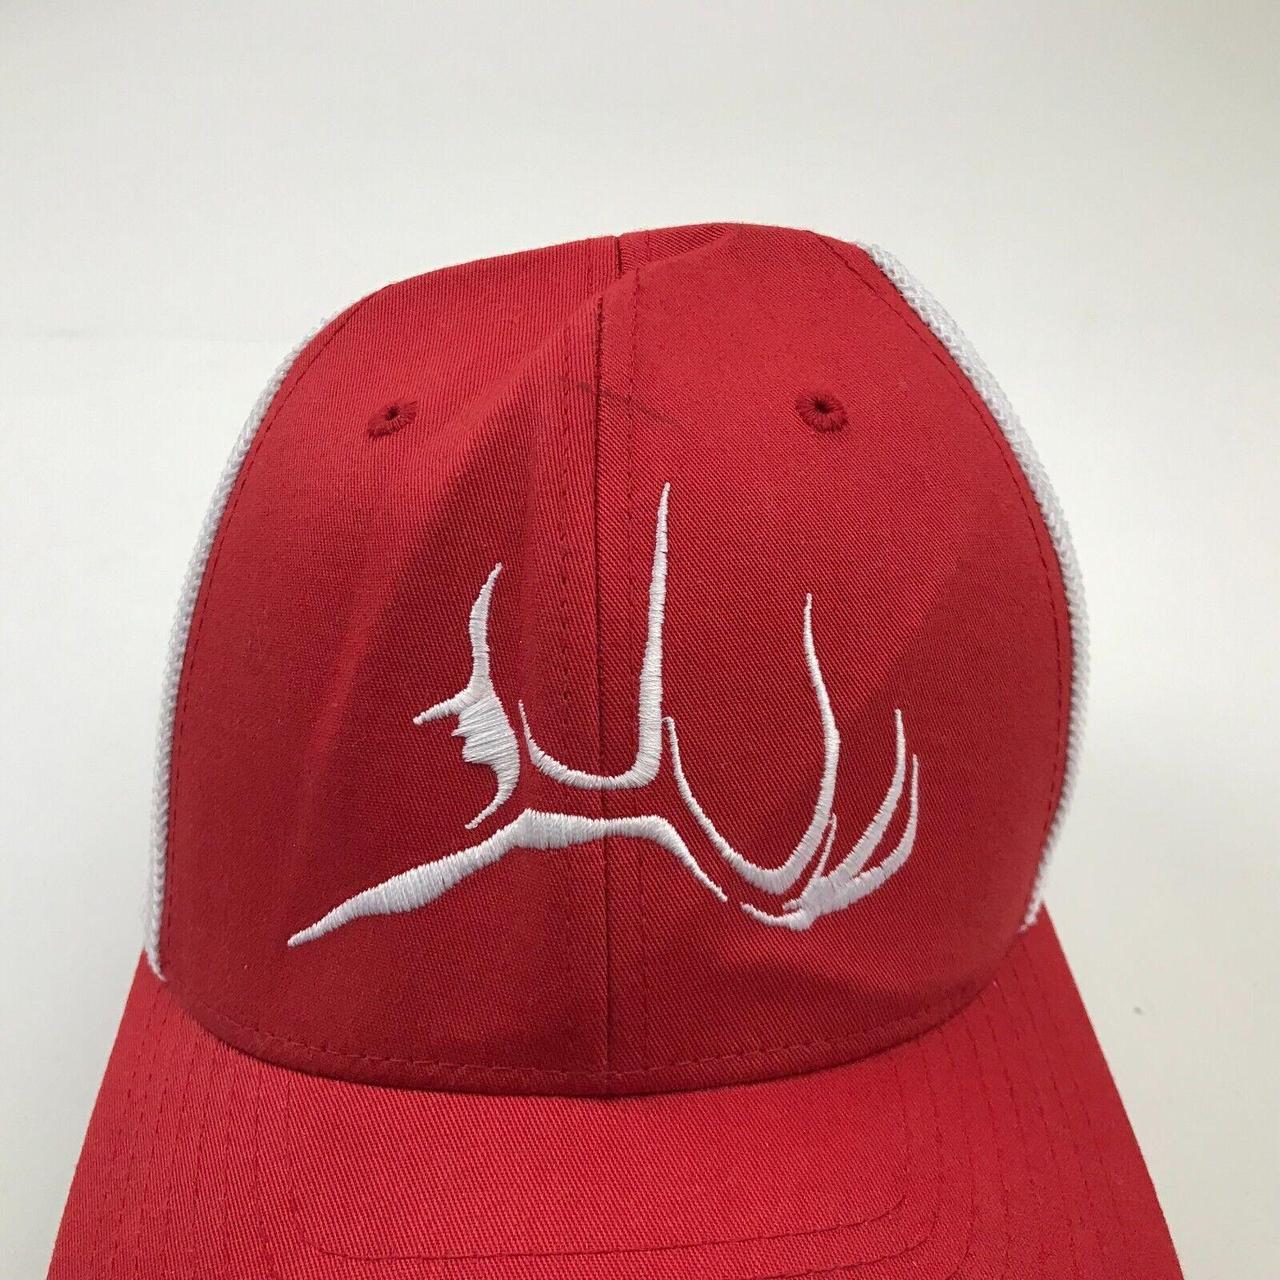 Hush Men's Red and White Hat (3)